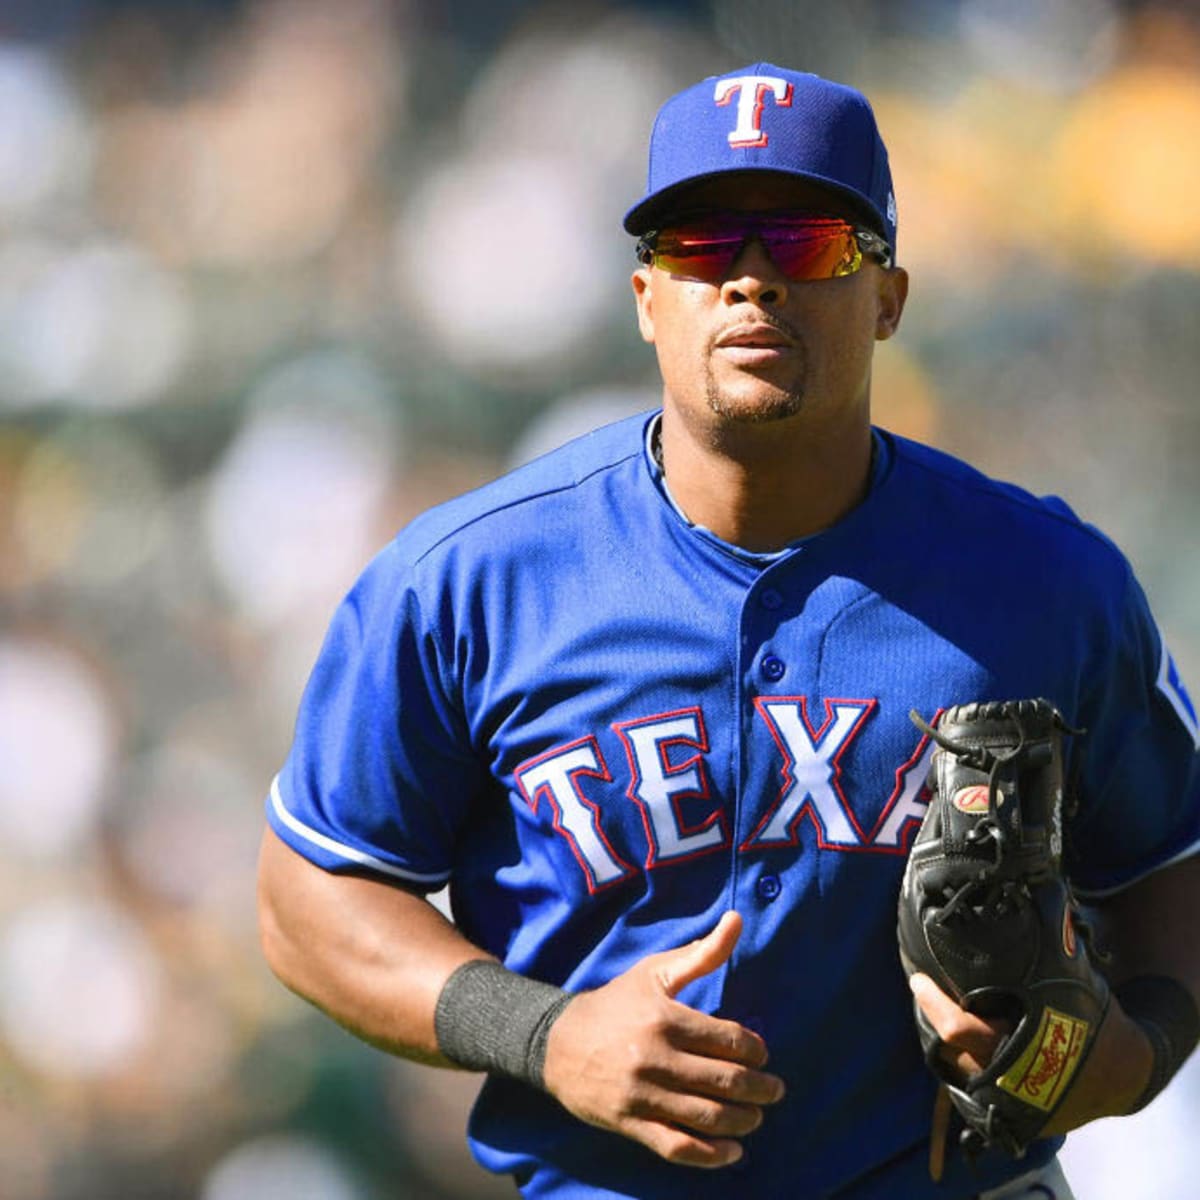 Adrian Beltre 'completely happy' with retirement after 21 seasons